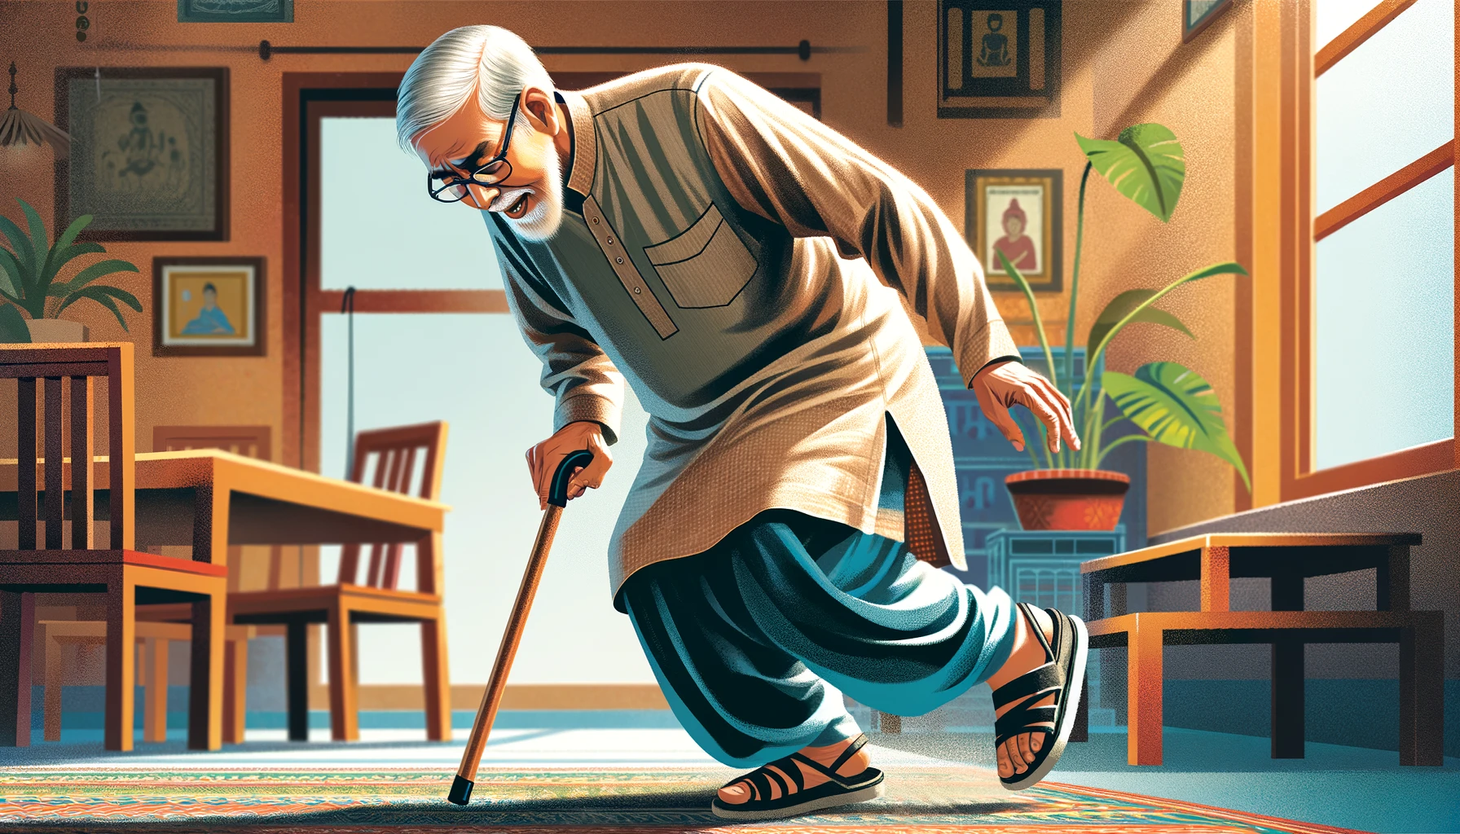 Poor Vision can Increase the Risk of Falls and Fractures